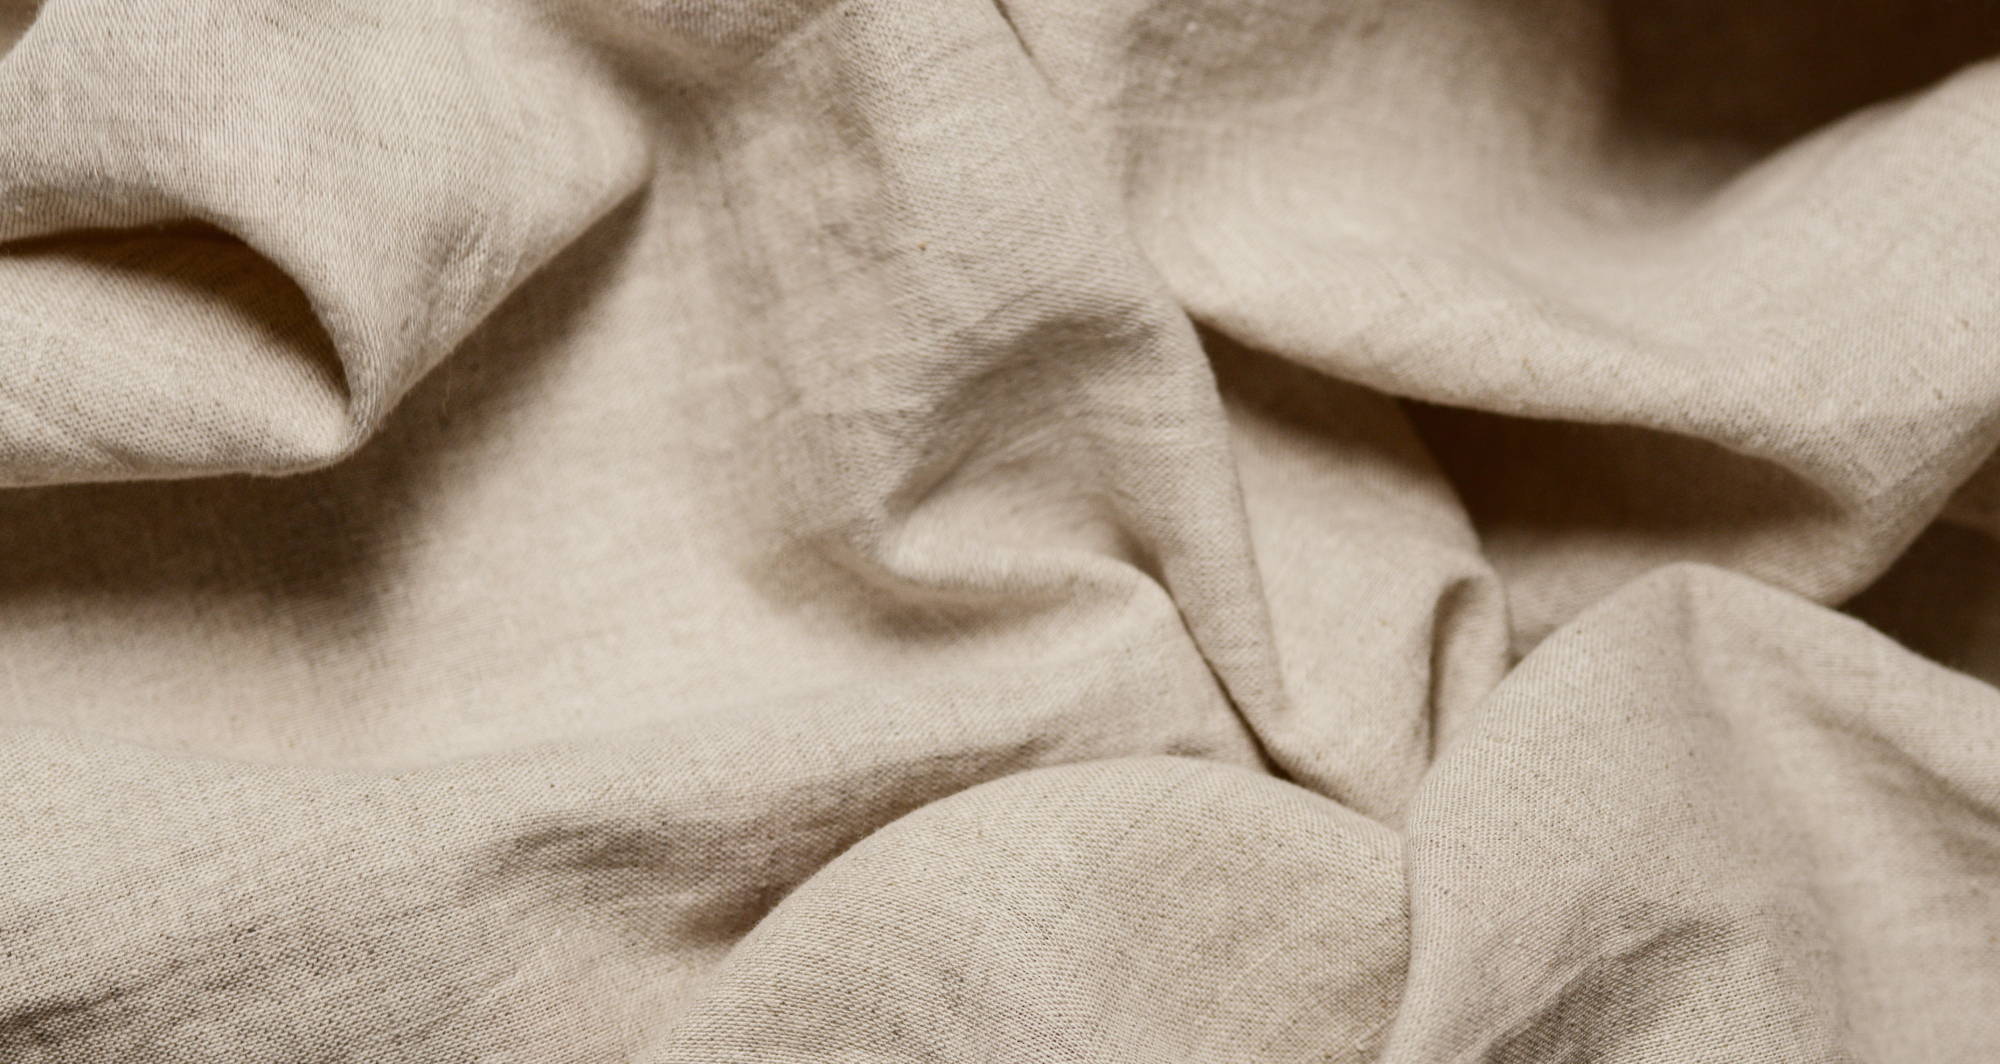 A skein of tan fabric is wrinkled and bunched and close-up enough to see the fabric texture.